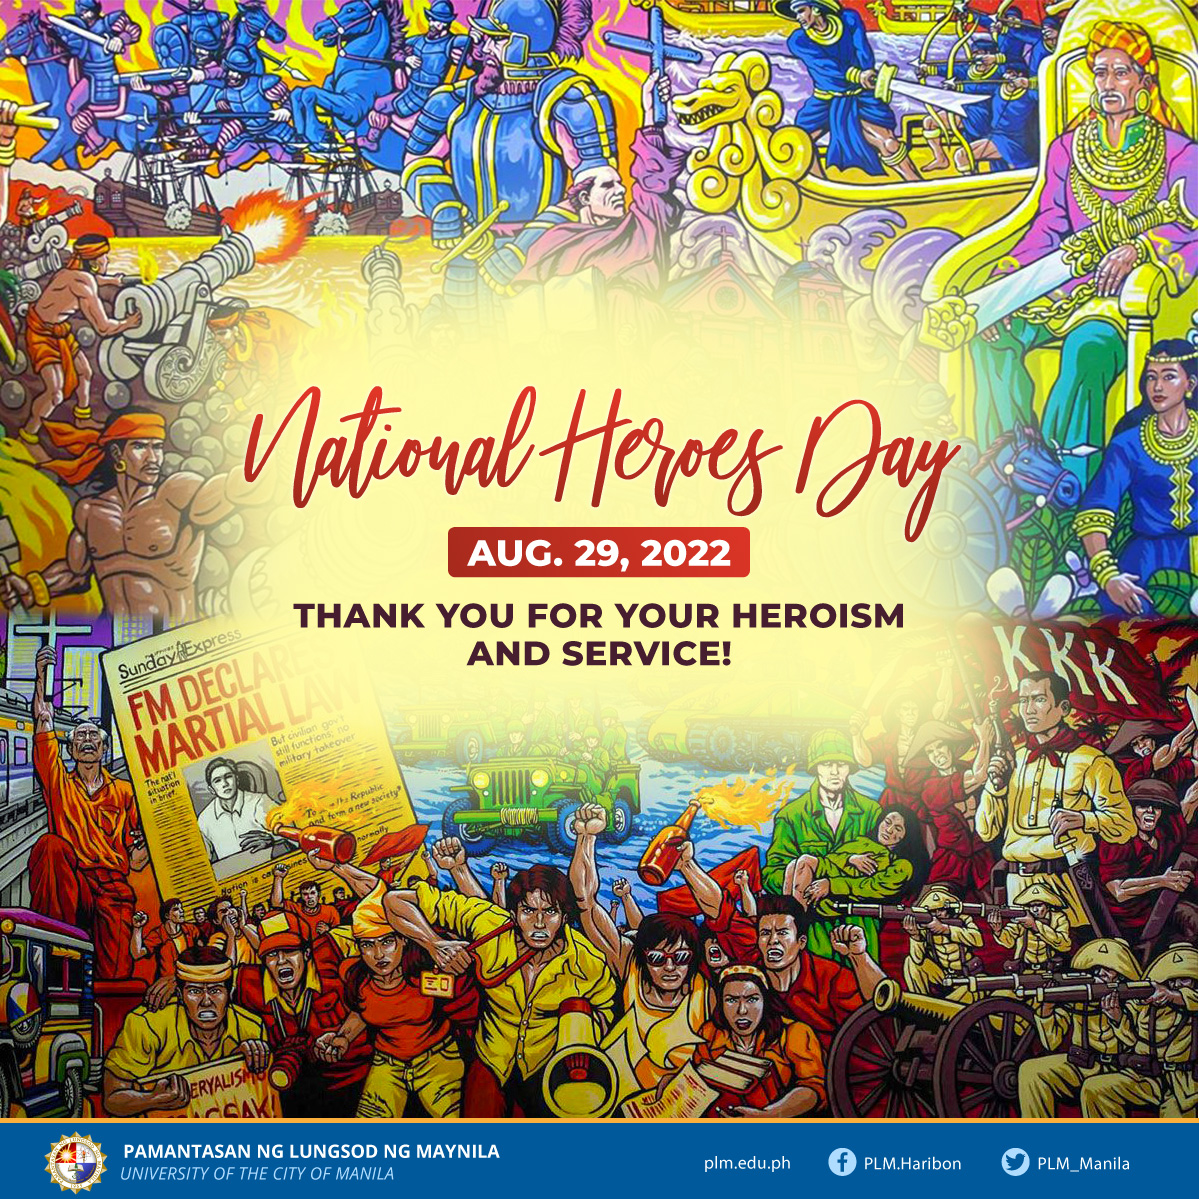 No Classes and work on August 26, 2022 (National Heroes Day)